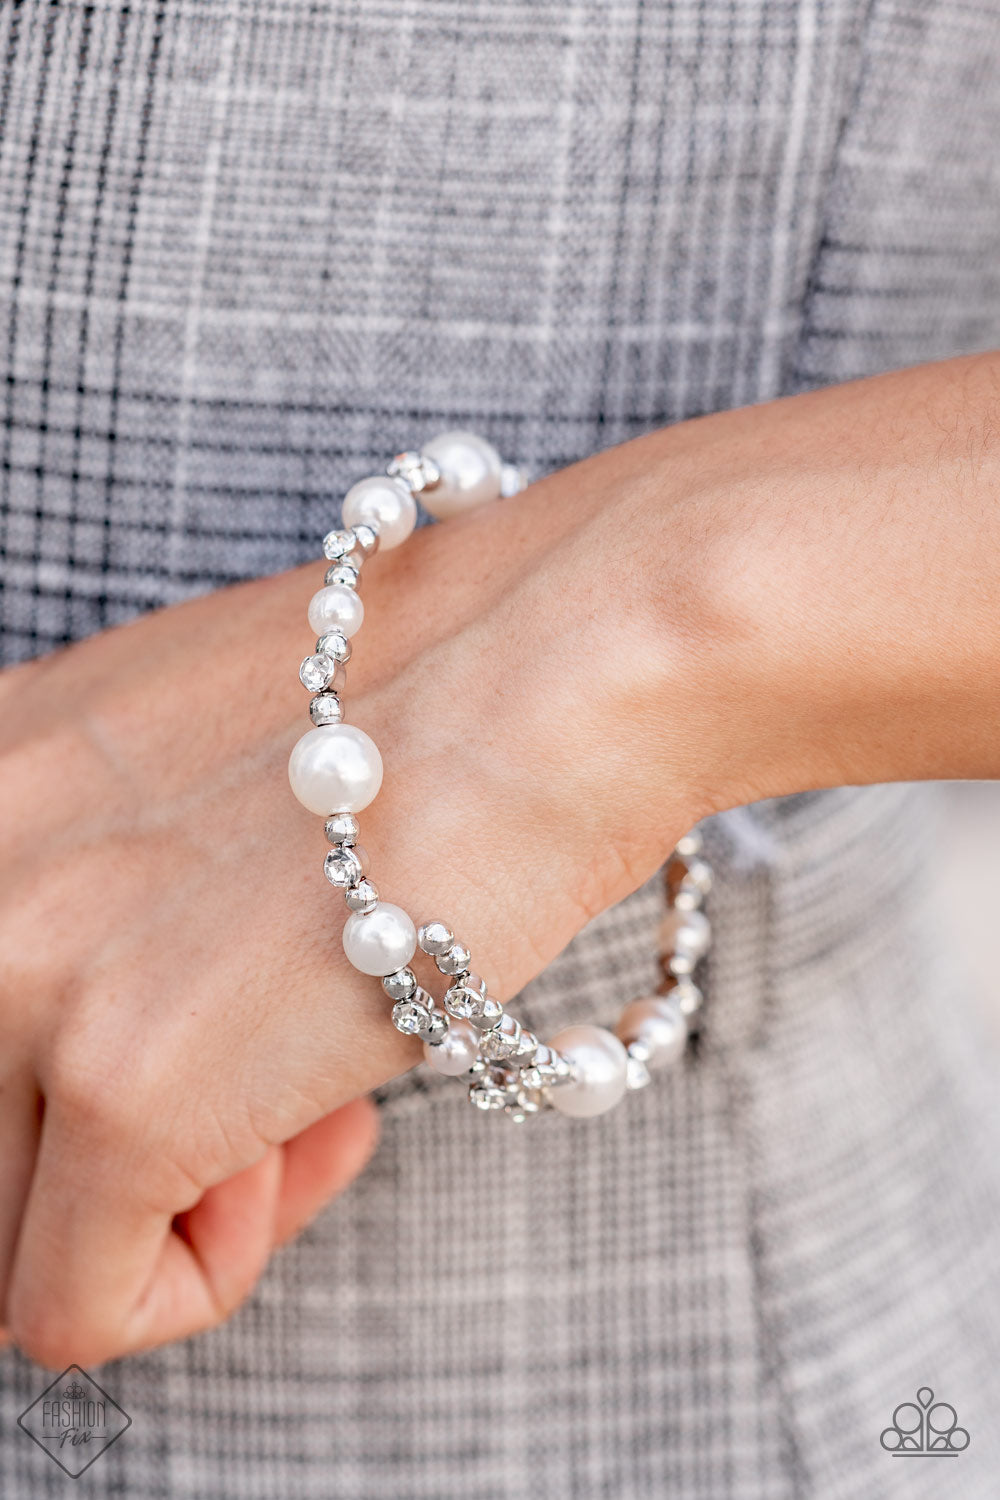 Chicly Celebrity White Pearl Bracelet - Paparazzi Accessories  Luscious bubbly pearls and brilliant white rhinestones are accented with shiny silver beads threaded along a single wire to create a chicly glamorous infinity wrap bracelet.  All Paparazzi Accessories are lead free and nickel free!  Sold as one individual bracelet.